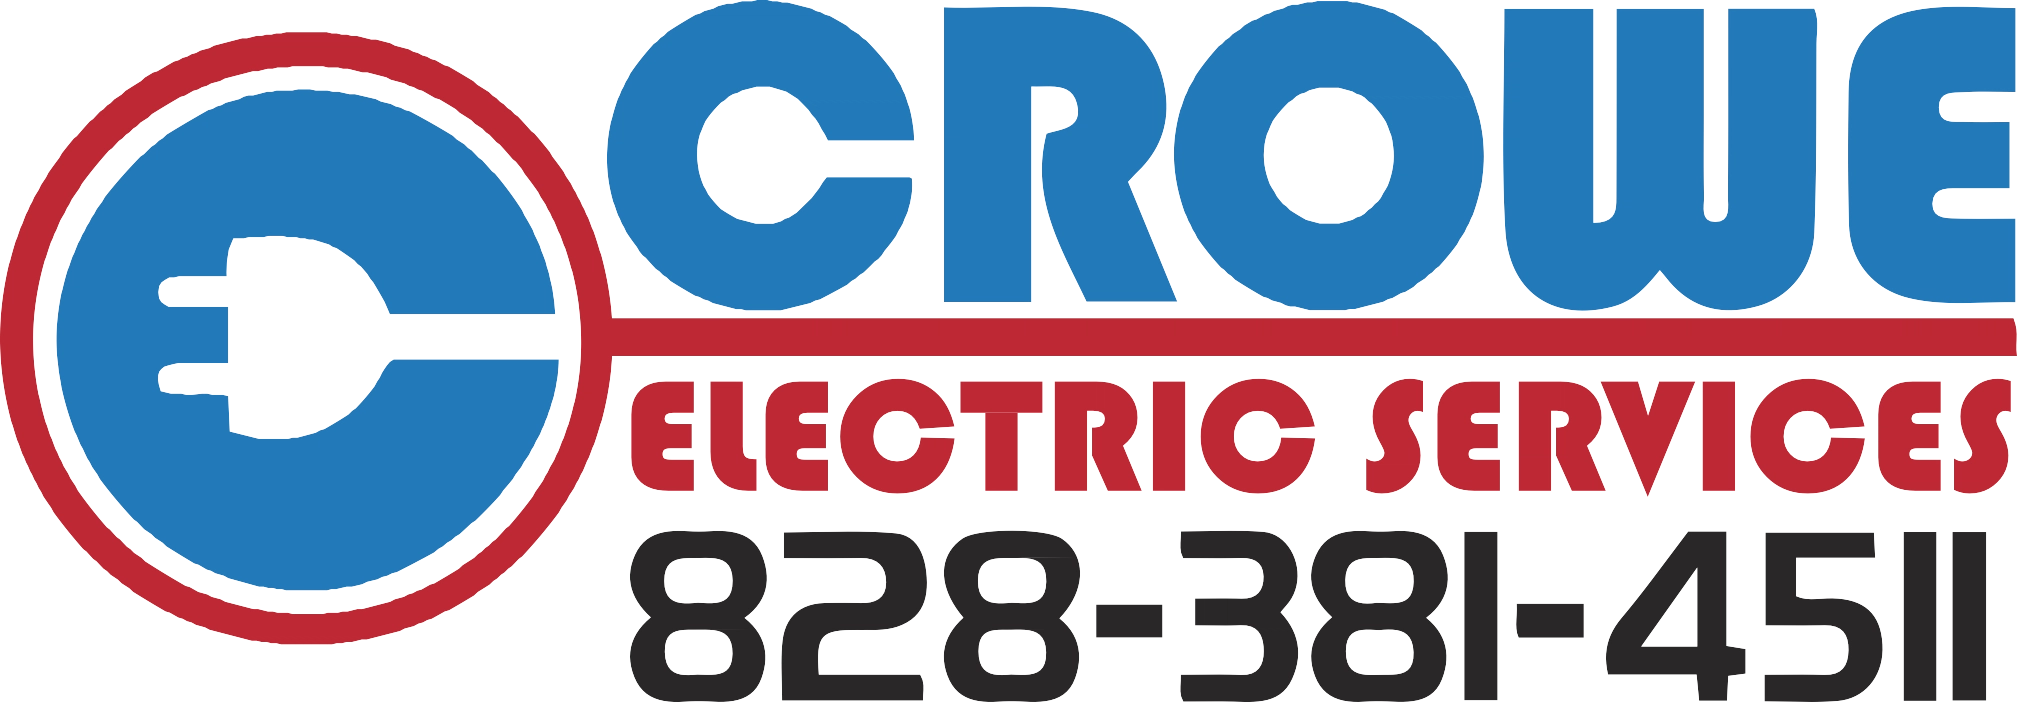 Crowe Electrical Services Logo